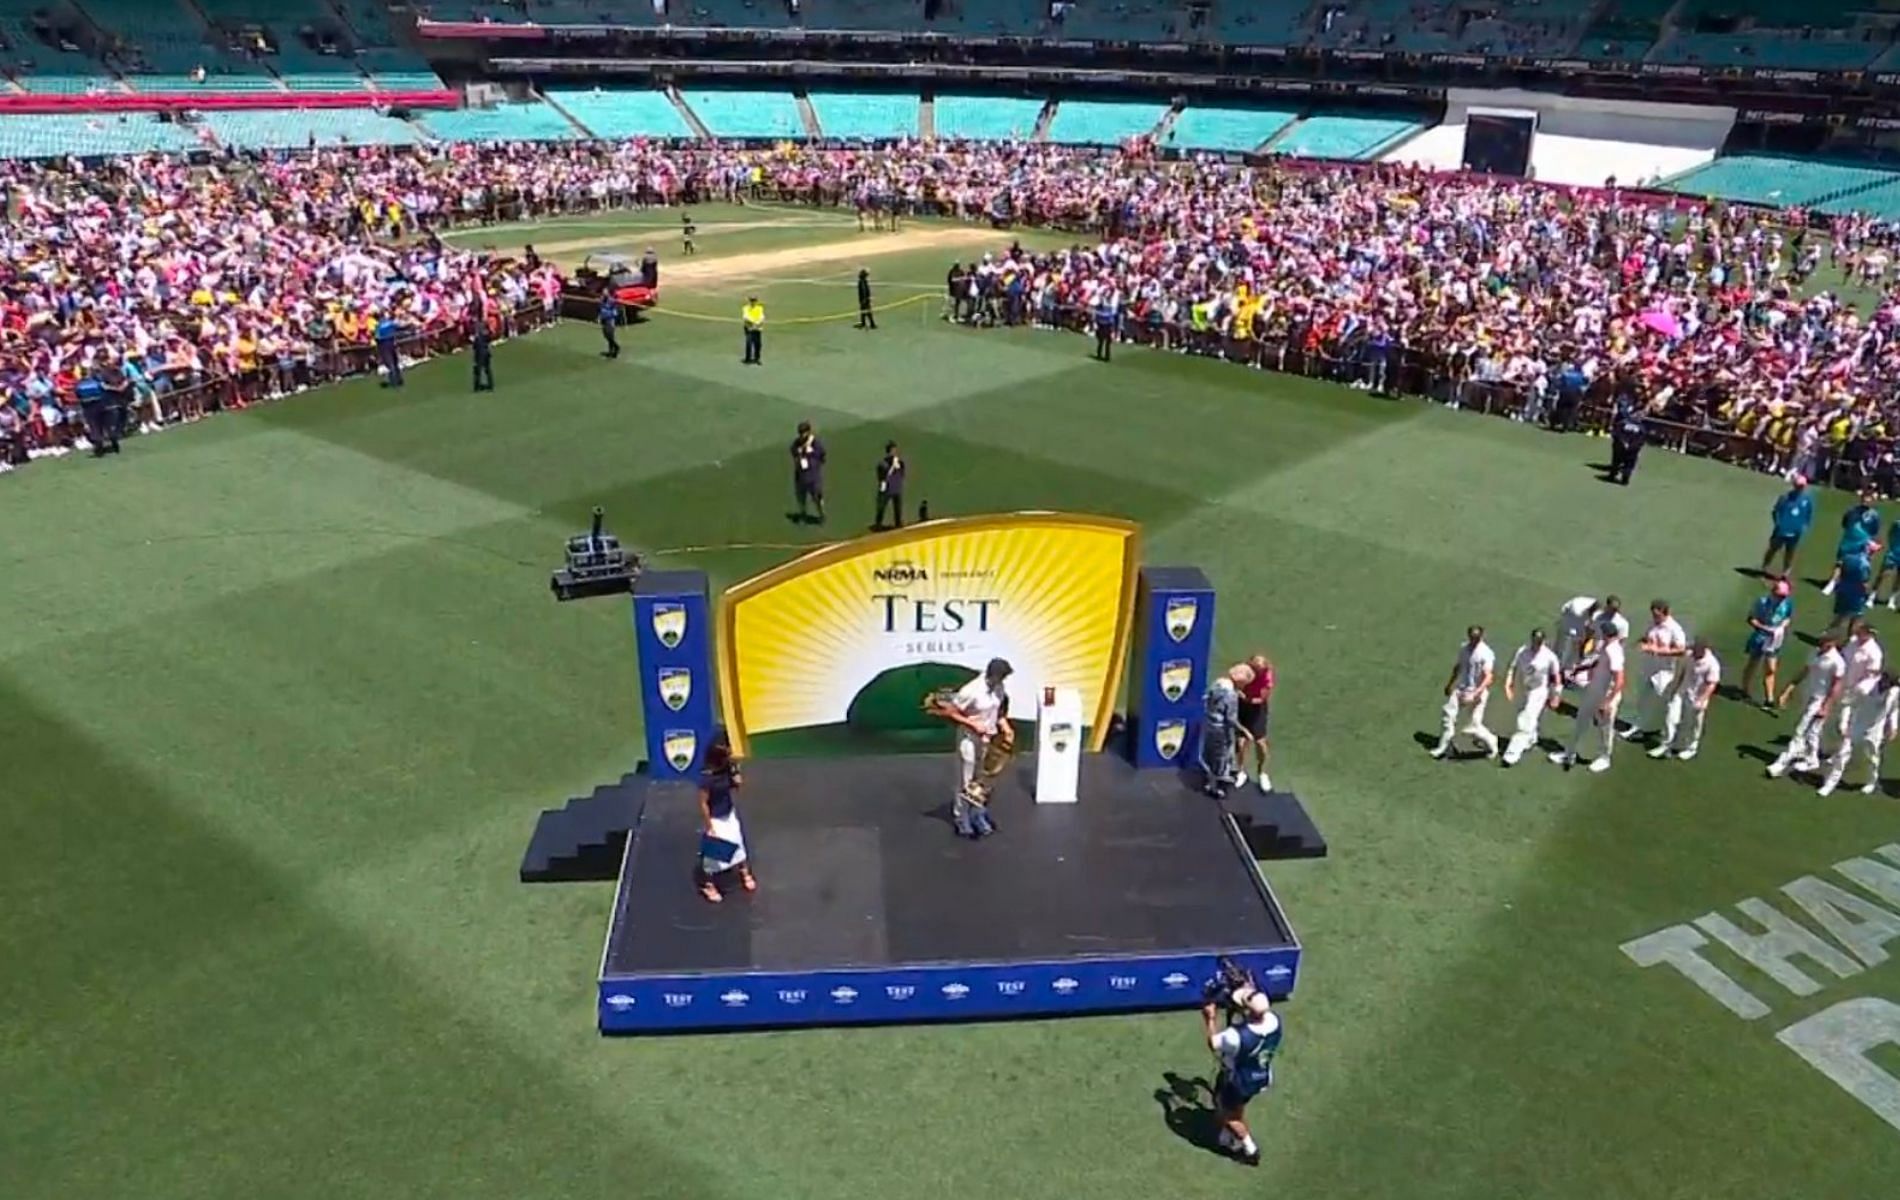 Fans at the SCG entered the field during the post-match presentation. (Pic: X)